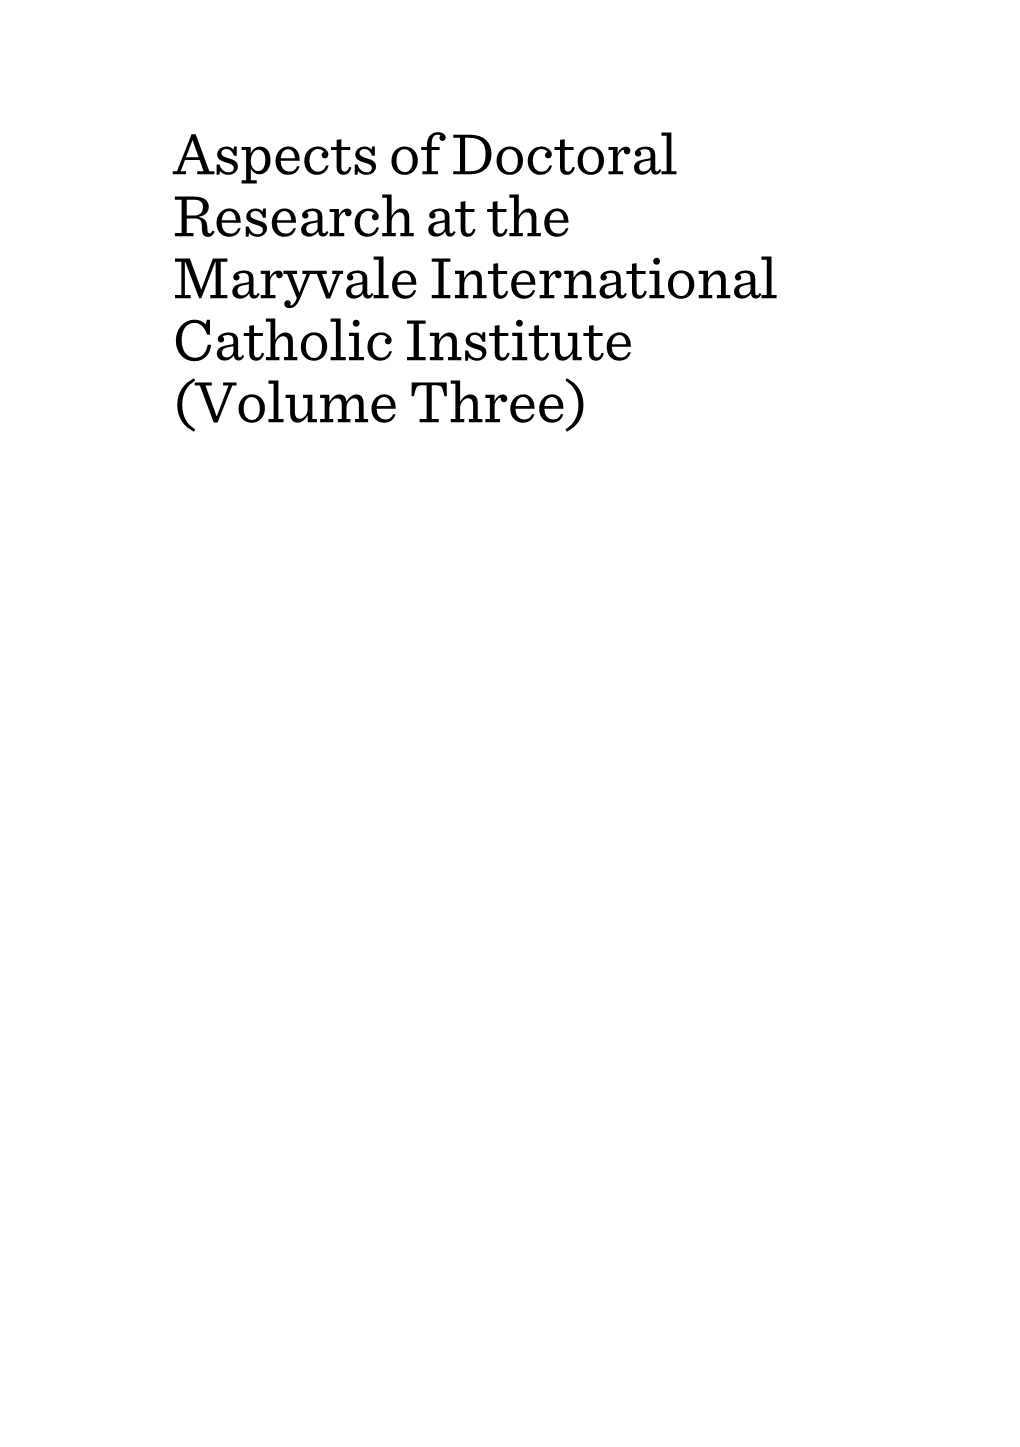 Aspects of Doctoral Research at the Maryvale International Catholic Institute (Volume Three)